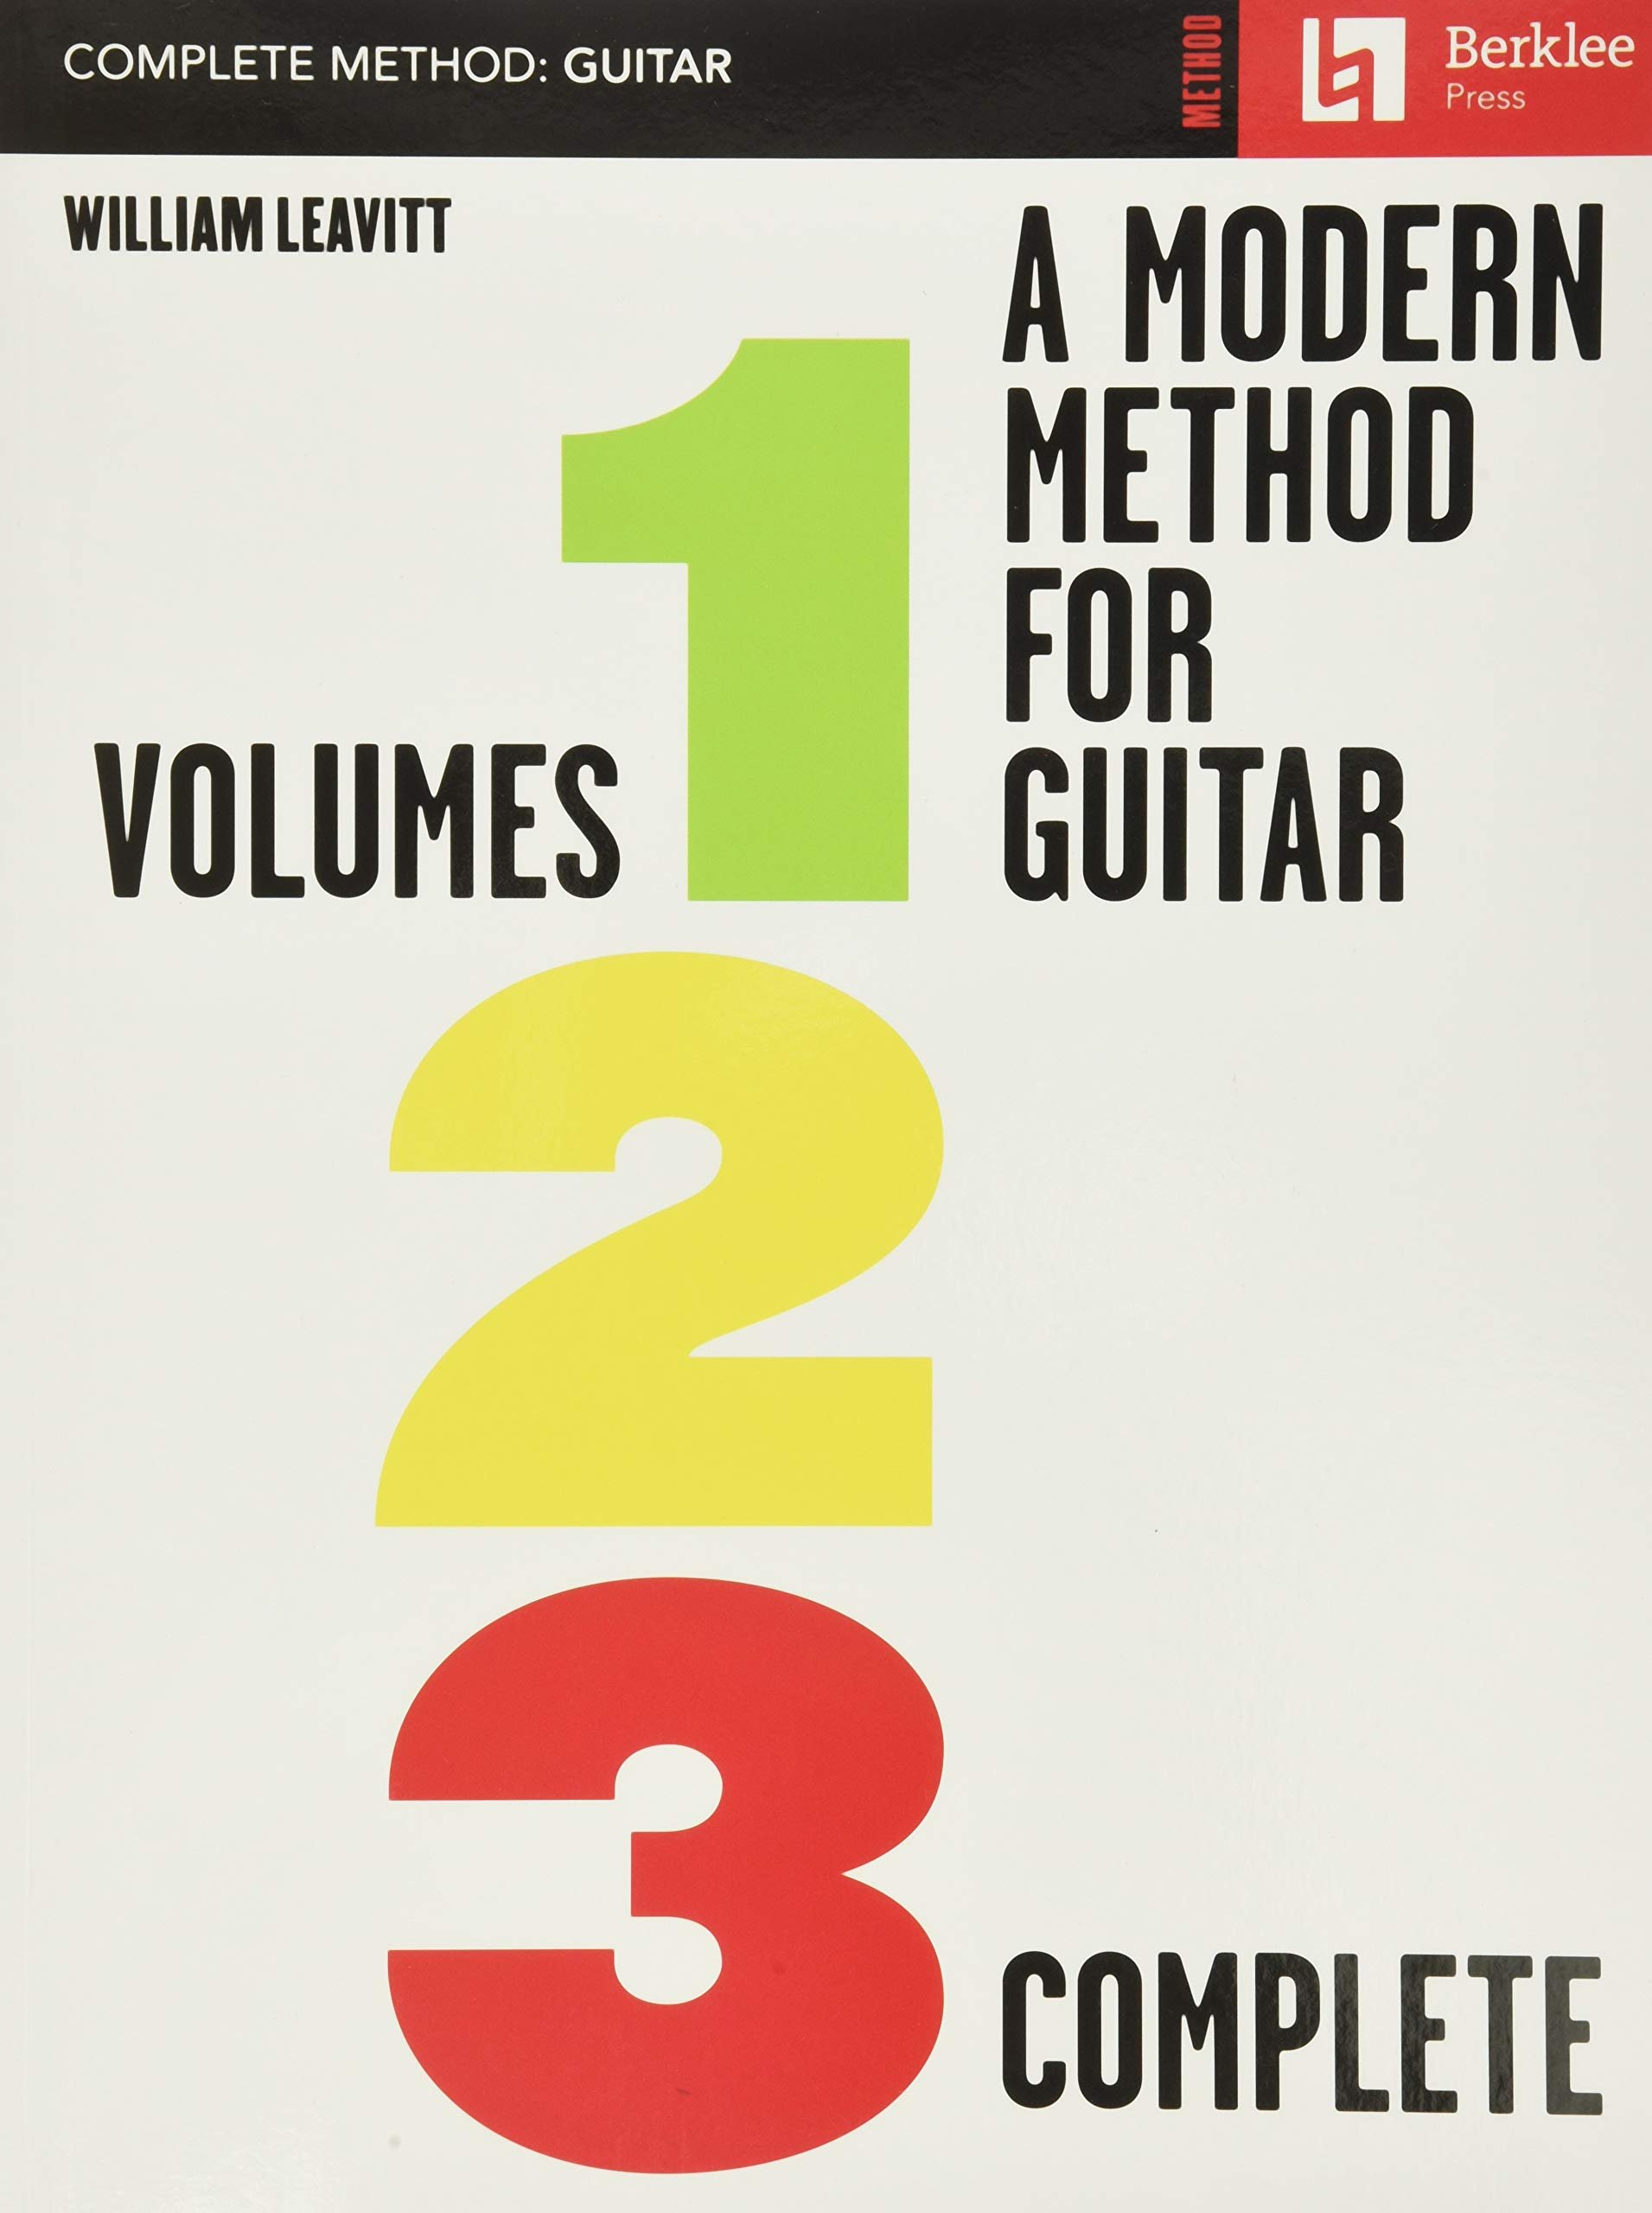 Book Cover A Modern Method for Guitar - Volumes 1, 2, 3 Complete